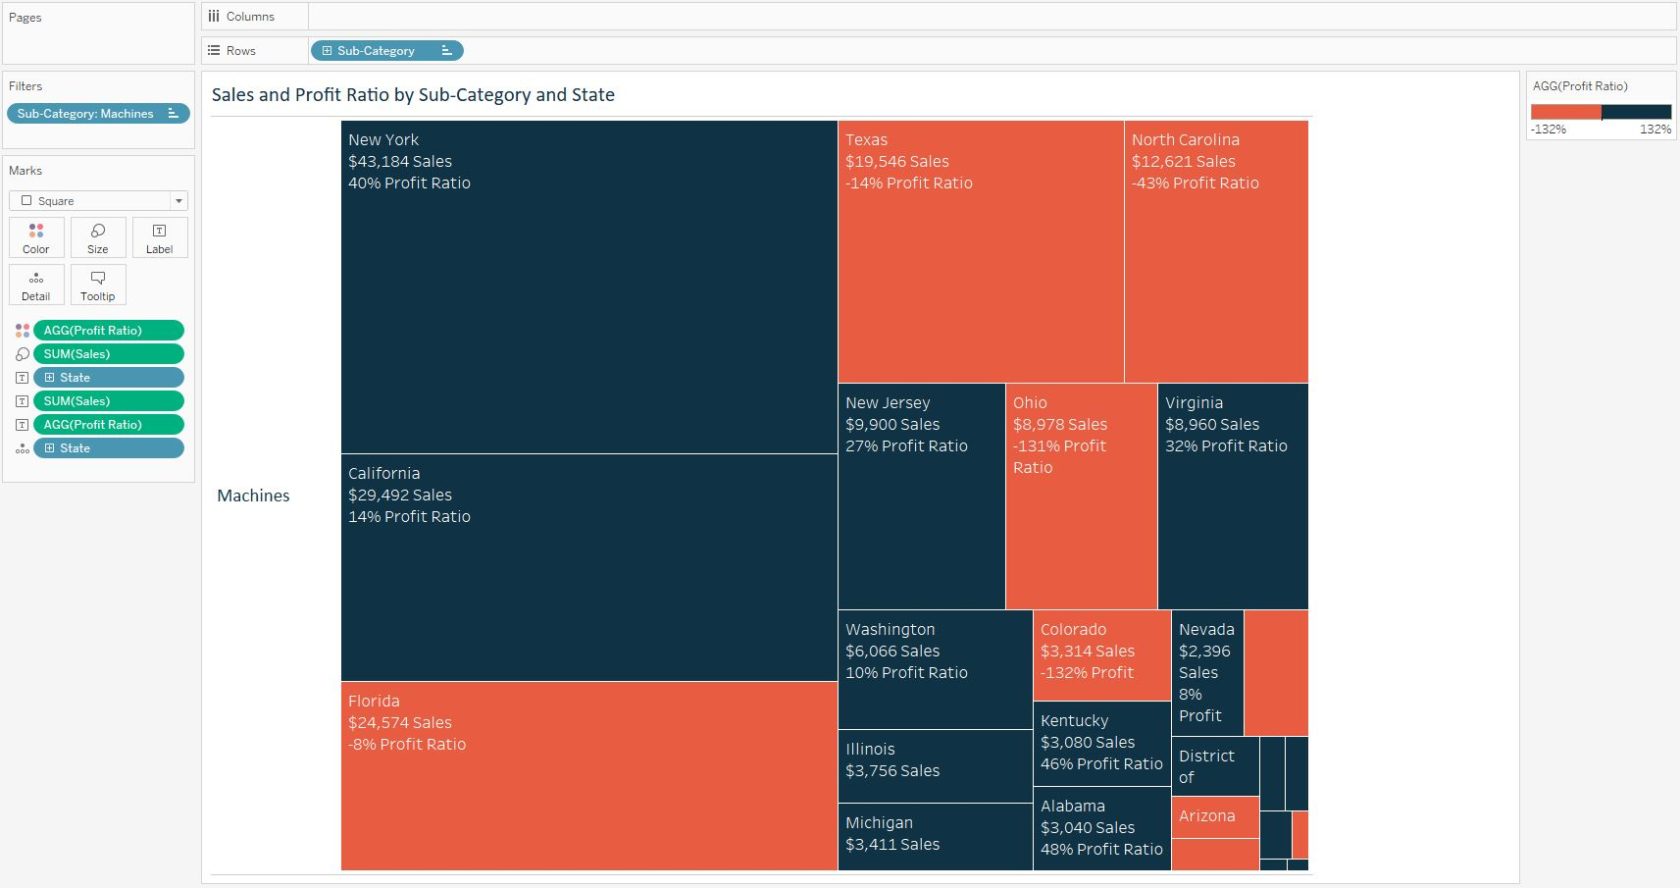 tableau-sales-and-profit-ratio-by-sub-category-and-state-tree-map-filtered